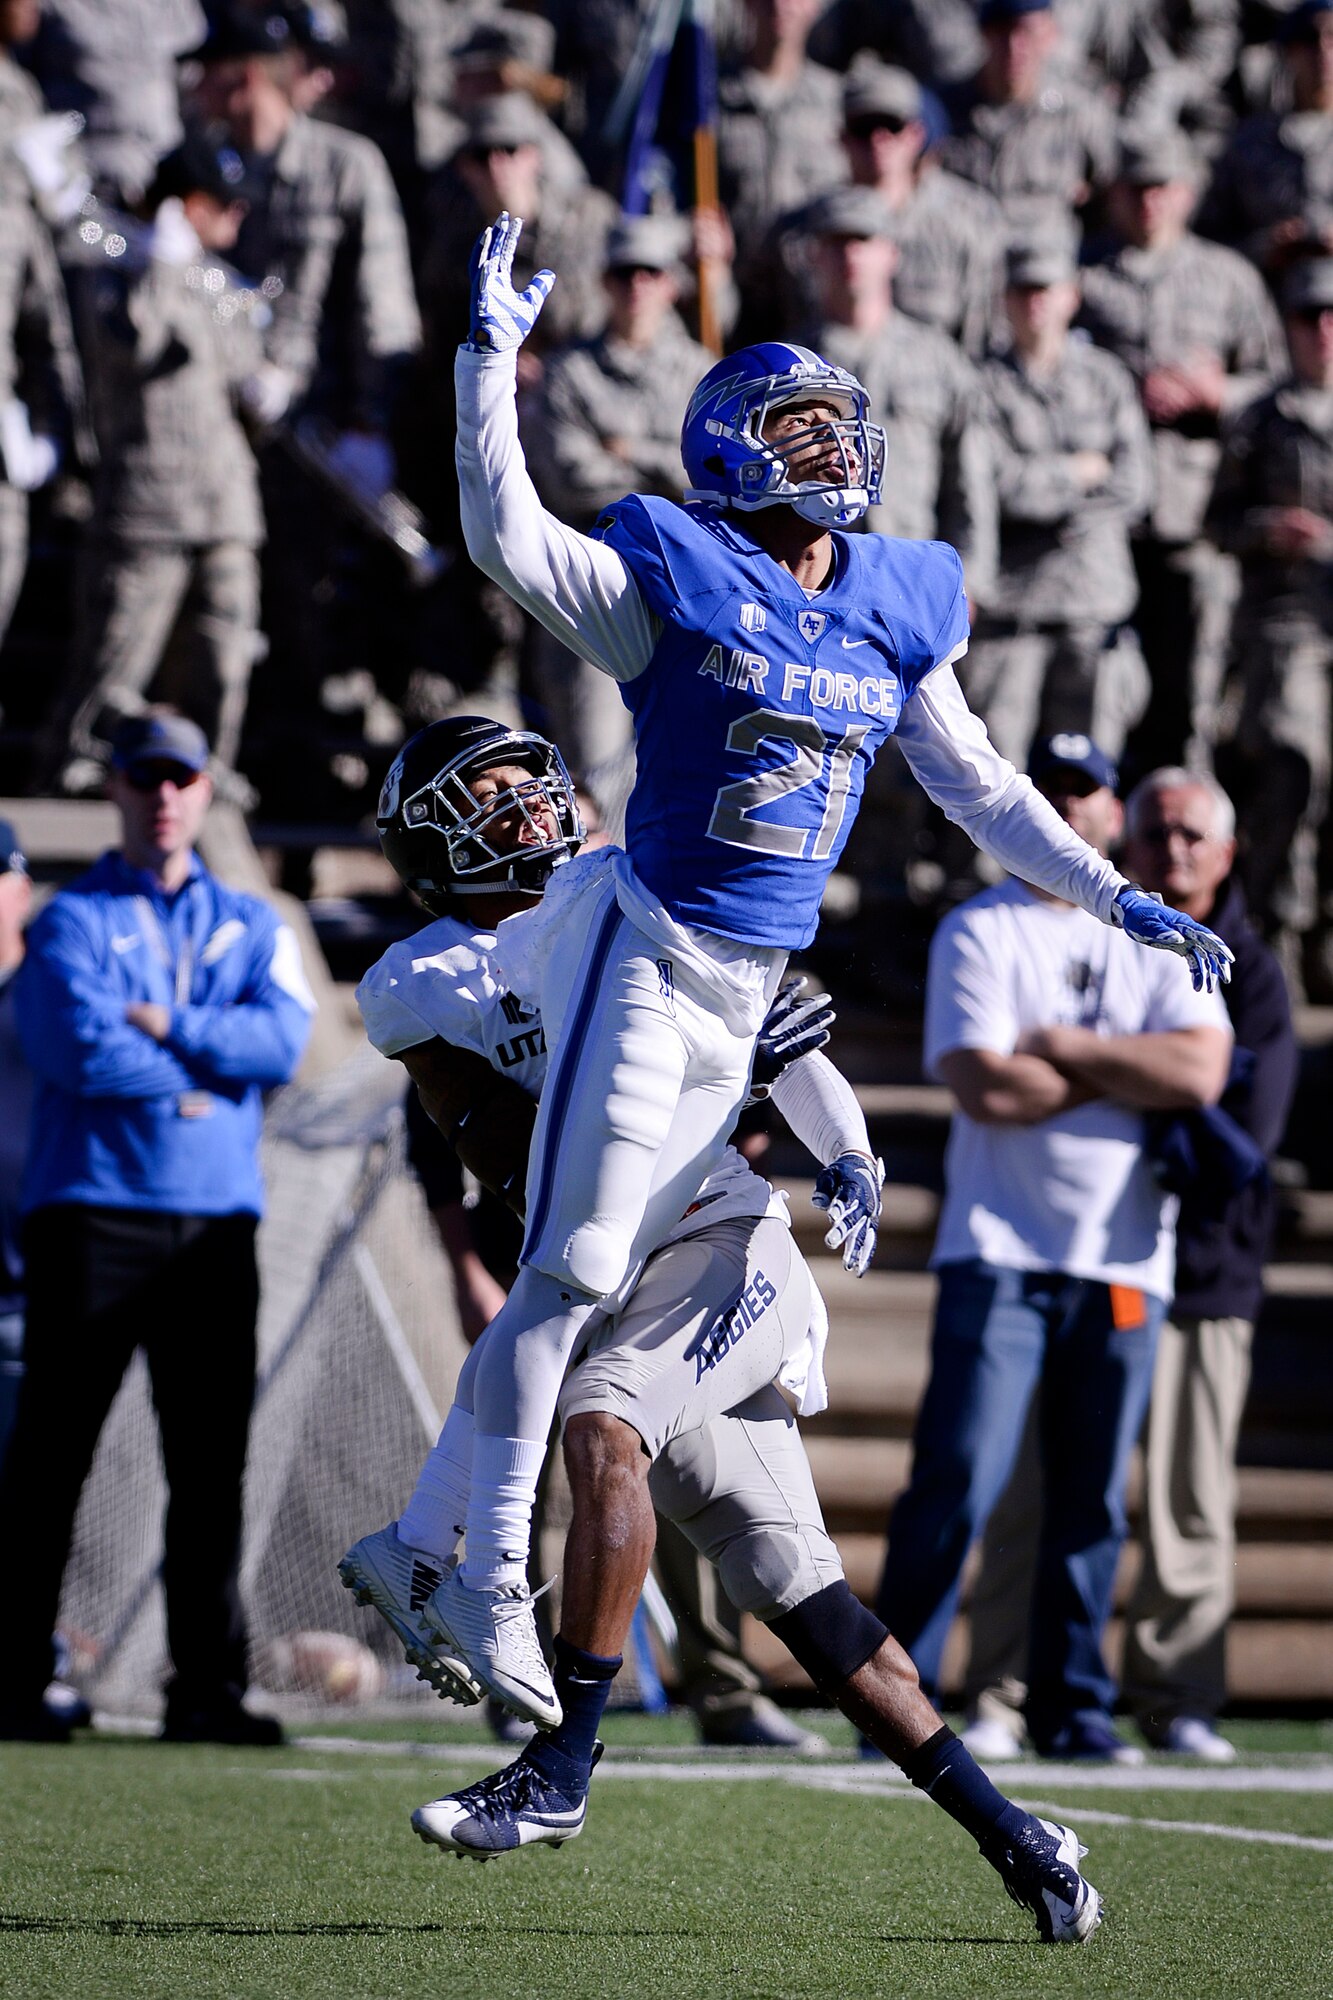 Air Force Falcons cornerback Jesse Washington goes airborne to defend a pass against Utah State, Nov. 14, 2015, at Falcon Stadium. Air Force beat the Aggies 35-28. (U.S. Air Force photo/Mike Kaplan) 